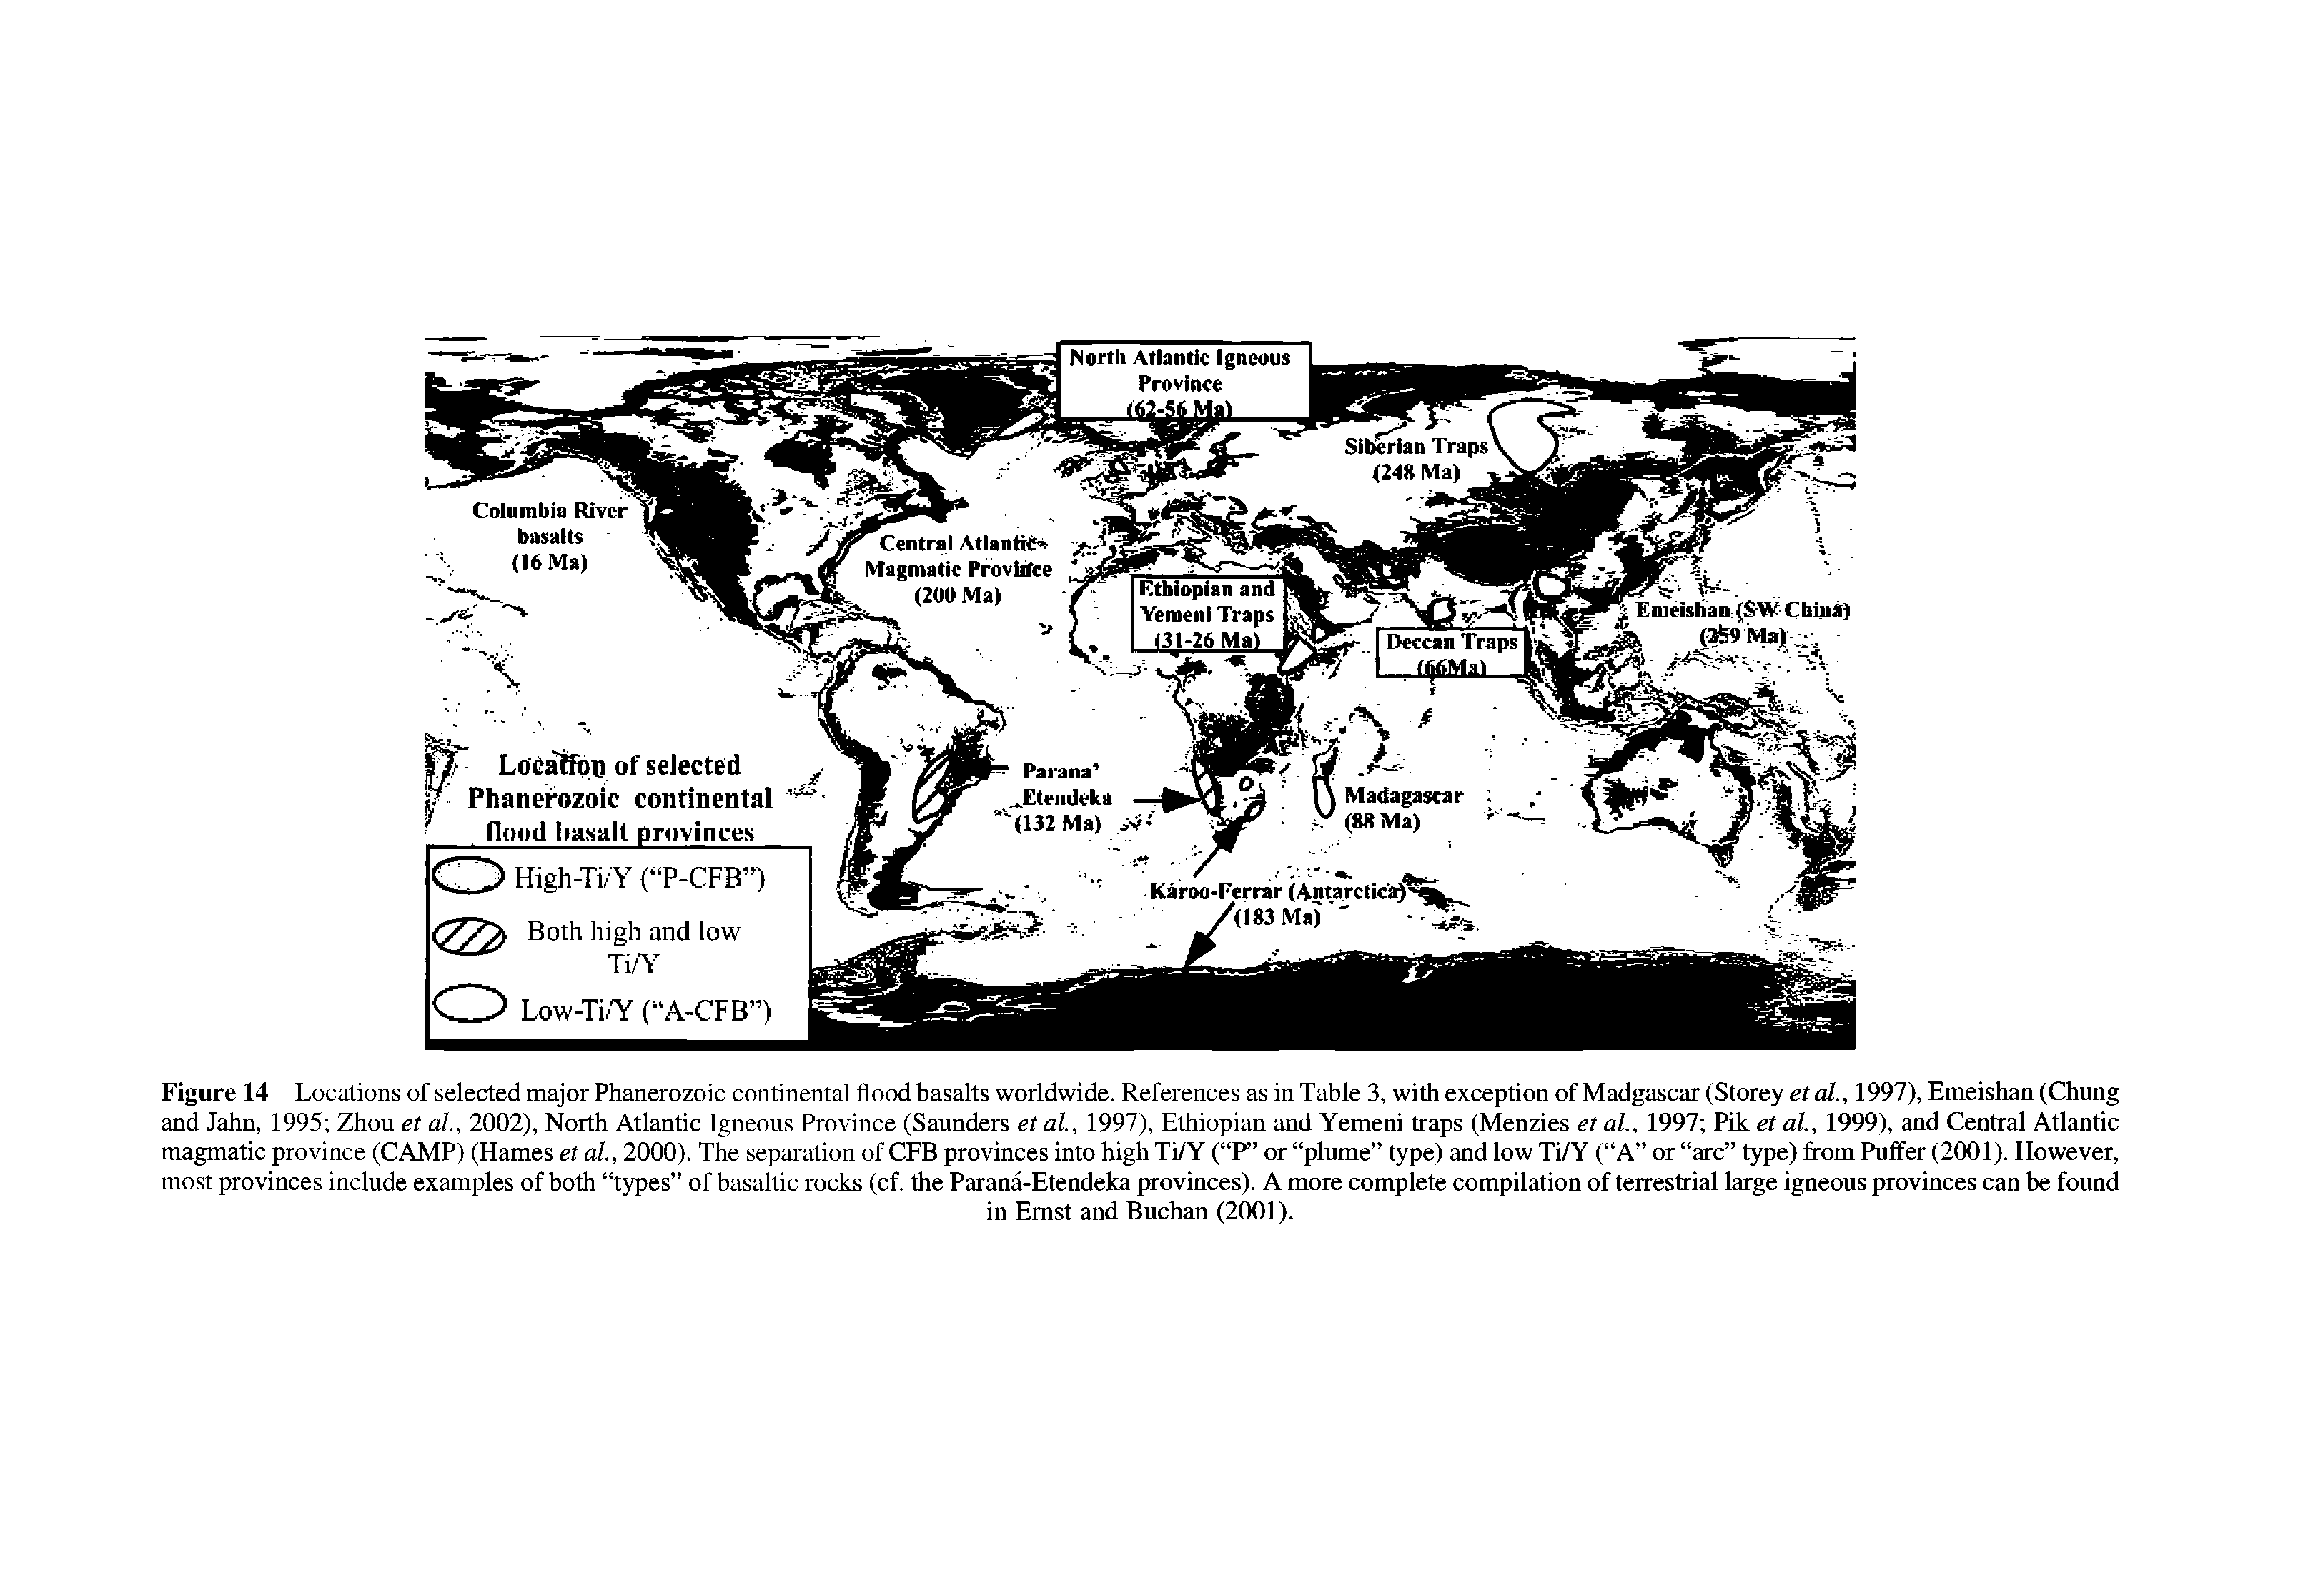 Figure 14 Locations of selected major Phanerozoic continental flood basalts worldwide. References as in Table 3, with exception of Madgascar (Storey et al., 1997), Emeishan (Chung and Jahn, 1995 Zhou et al, 2002), North Atlantic Igneous Province (Saunders et al, 1997), Ethiopian and Yemeni traps (Menzies et al, 1997 Pik et al, 1999), and Central Atlantic magmatic province (CAMP) (Hames et al, 2000). The separation of CEB provinces into high Ti/Y ( P or plume type) and low Ti/Y ( A or arc type) from Puffer (2001). However, most provinces include examples of both types of basaltic rocks (cf. the Parana-Etendeka provinces). A more complete compilation of terrestrial large igneous provinces can be found...